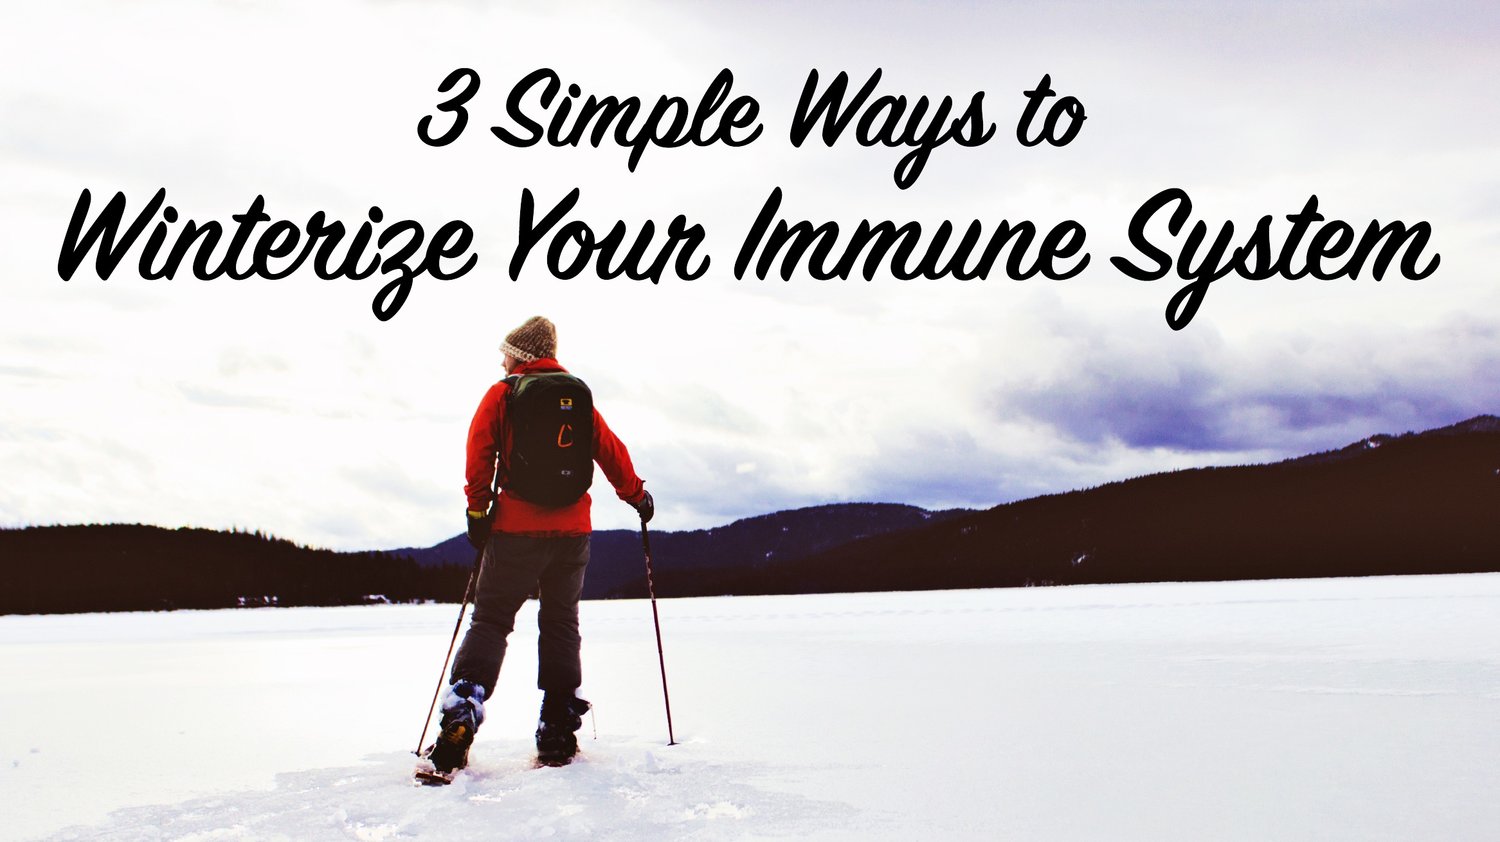 3 Simple Ways to "Winterize" Your Immune System